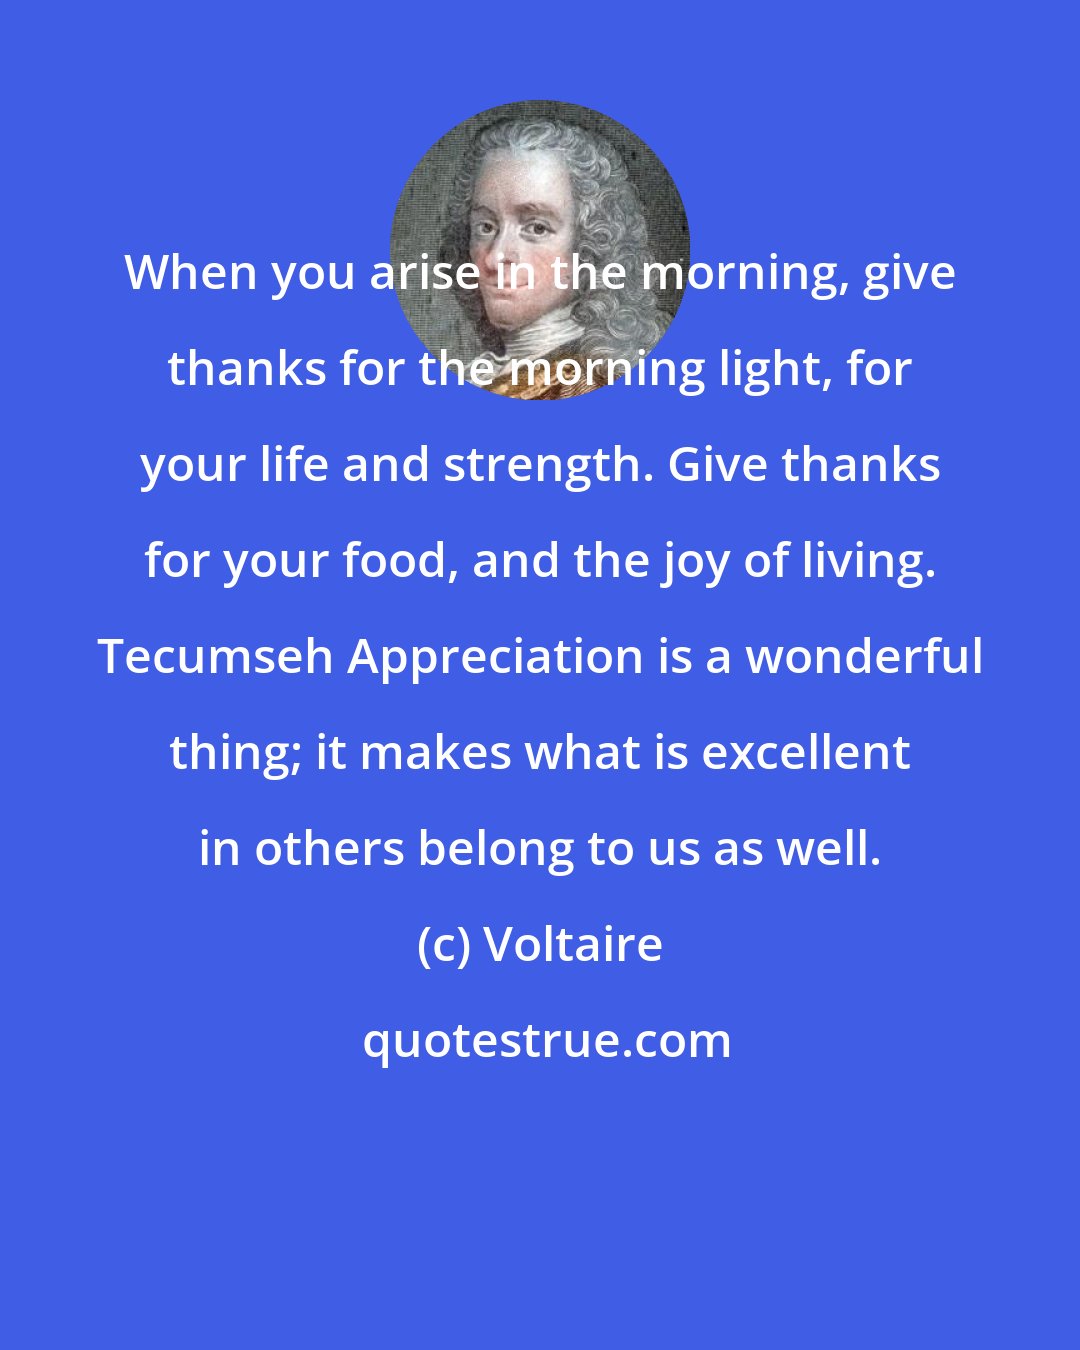 Voltaire: When you arise in the morning, give thanks for the morning light, for your life and strength. Give thanks for your food, and the joy of living. Tecumseh Appreciation is a wonderful thing; it makes what is excellent in others belong to us as well.